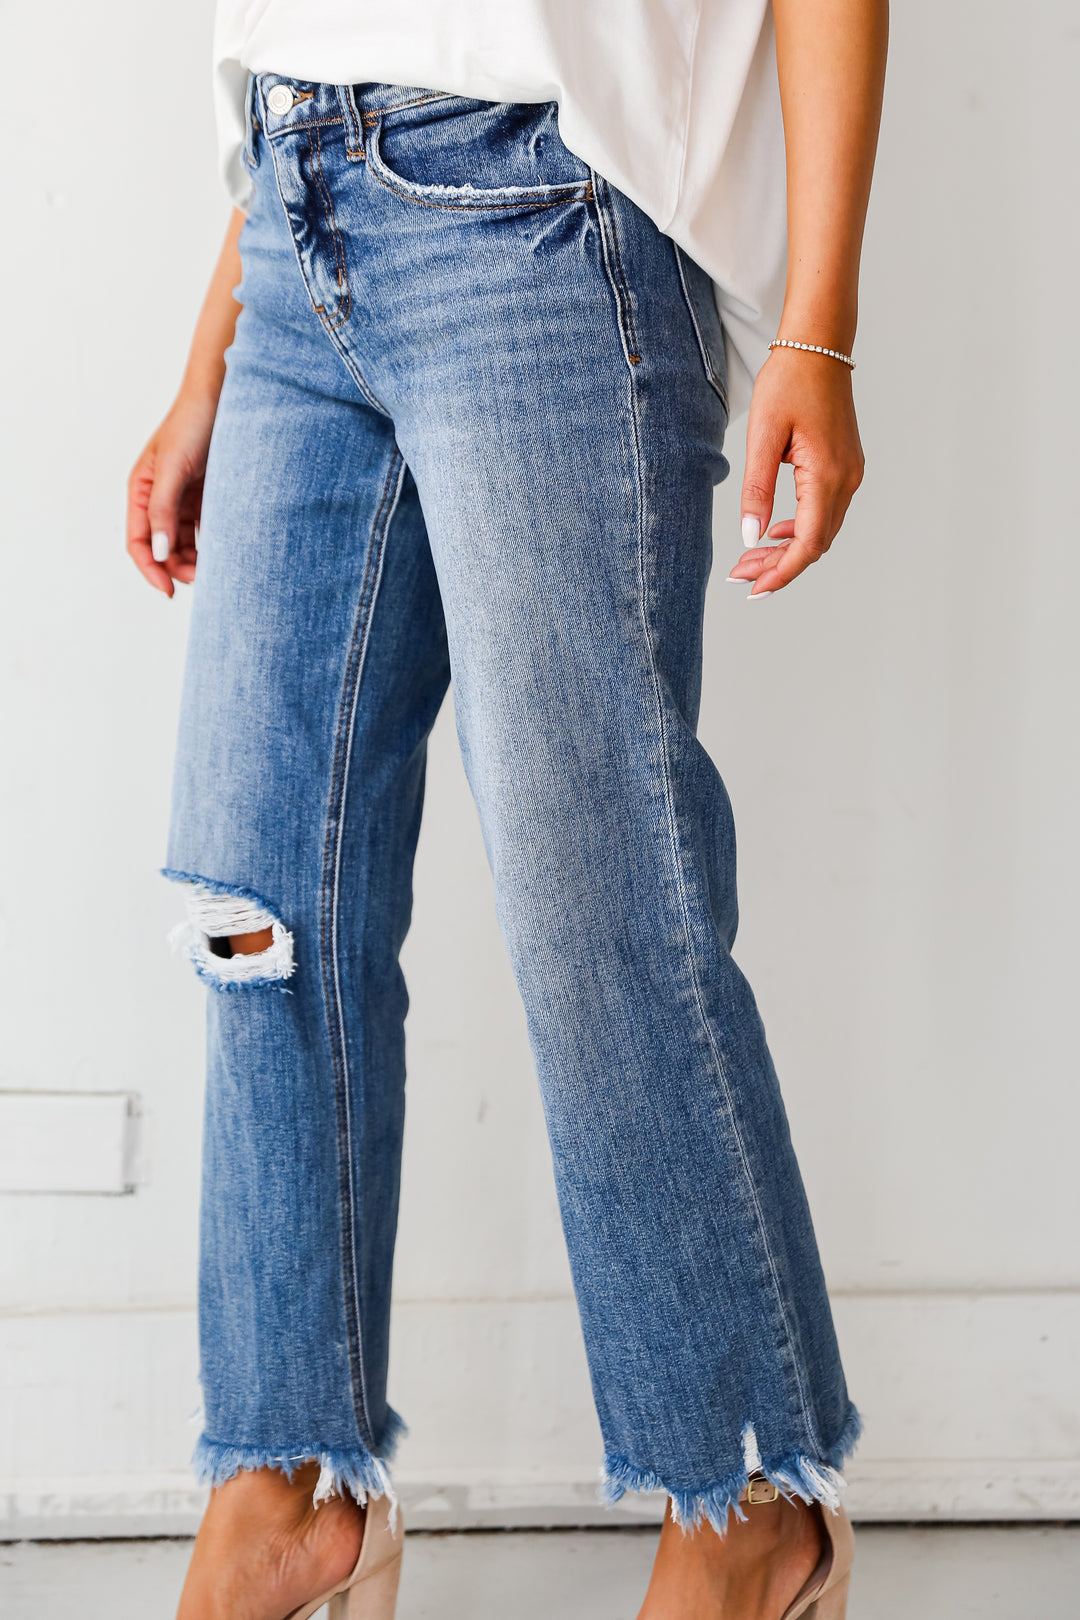 Medium Wash Distressed Dad Jeans for women